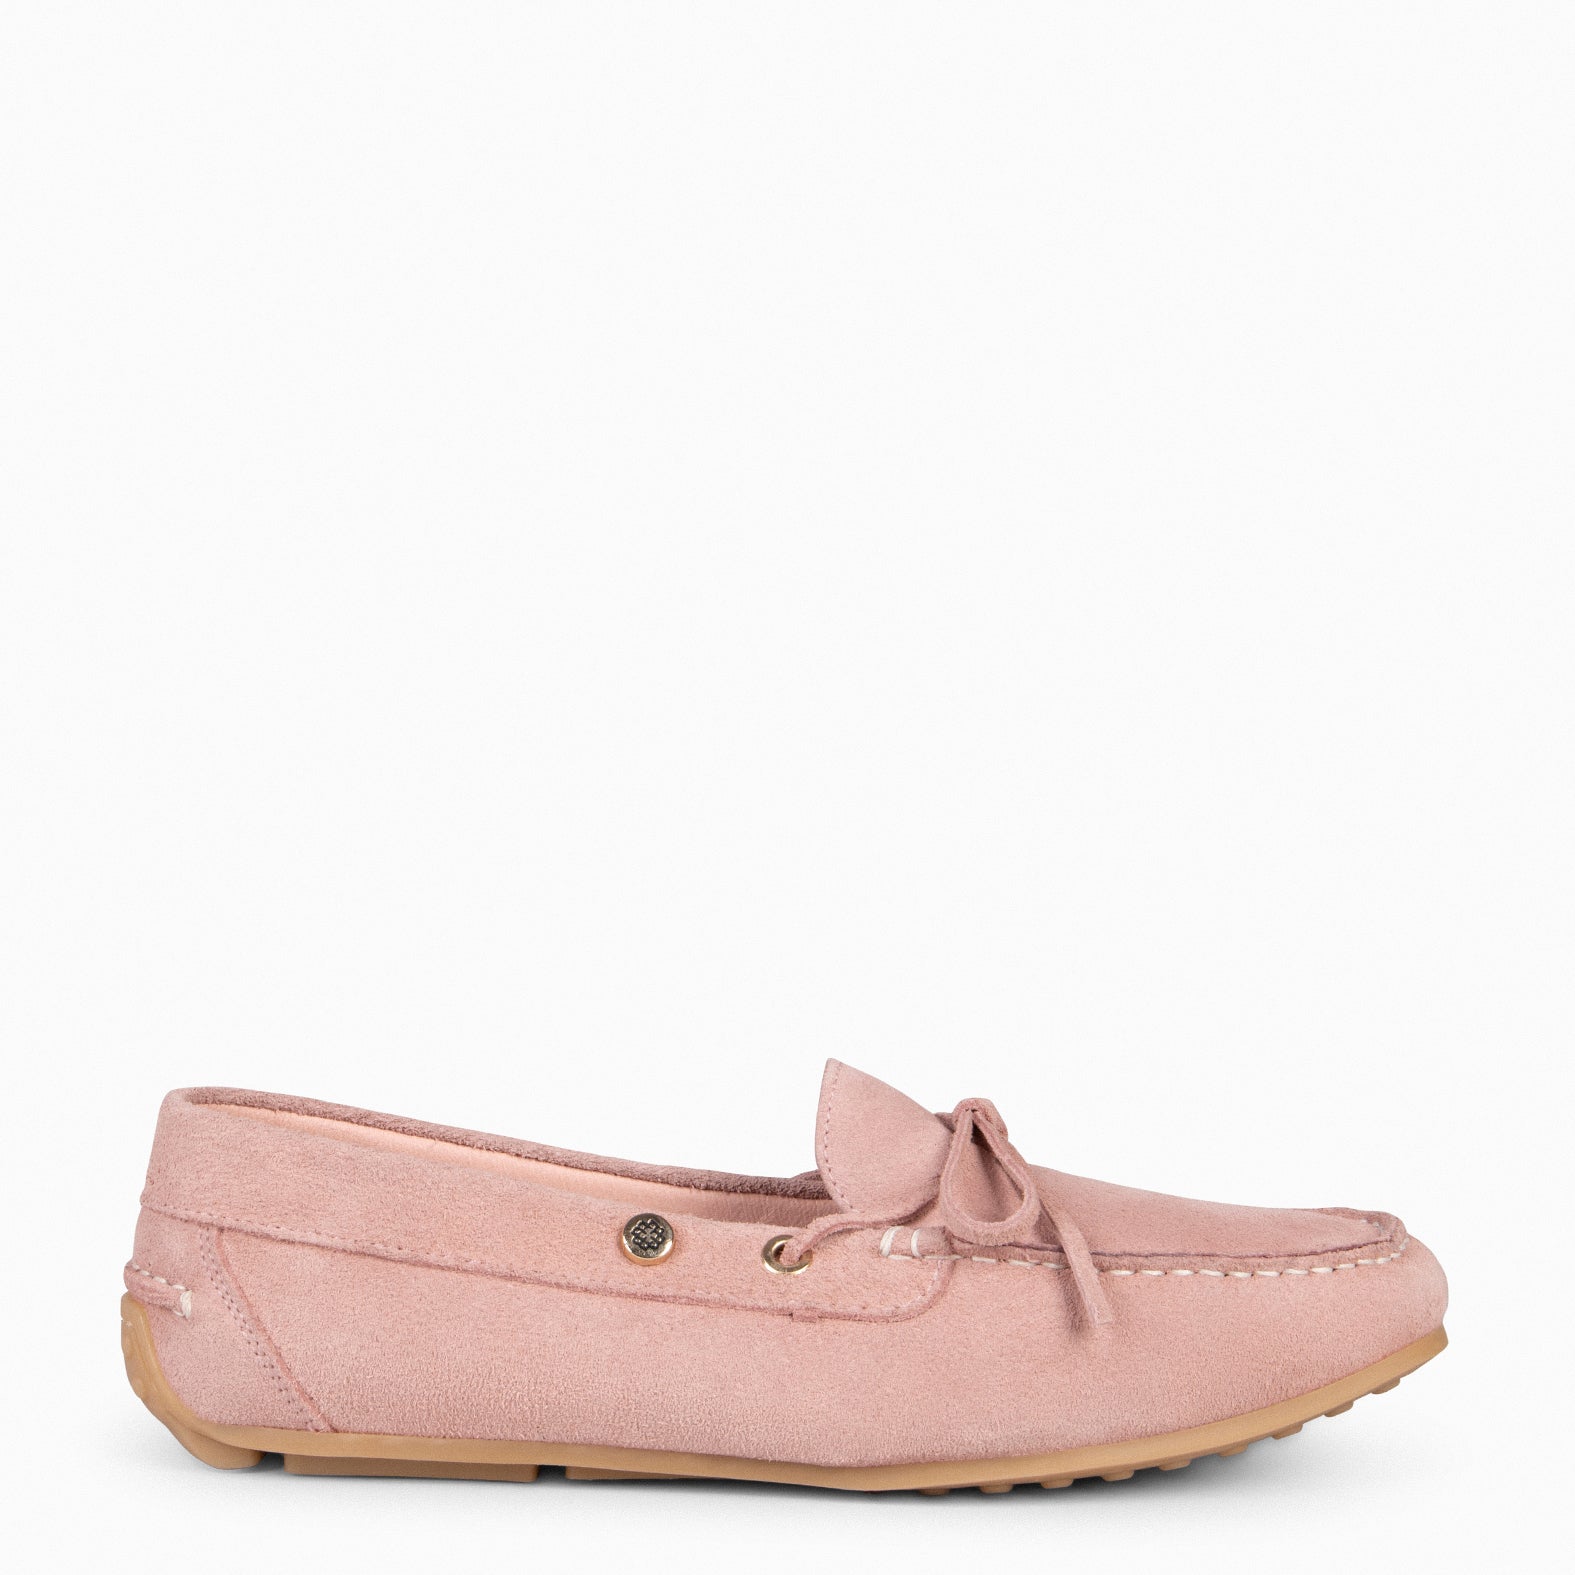 LACE – PINK moccasins with removable insole